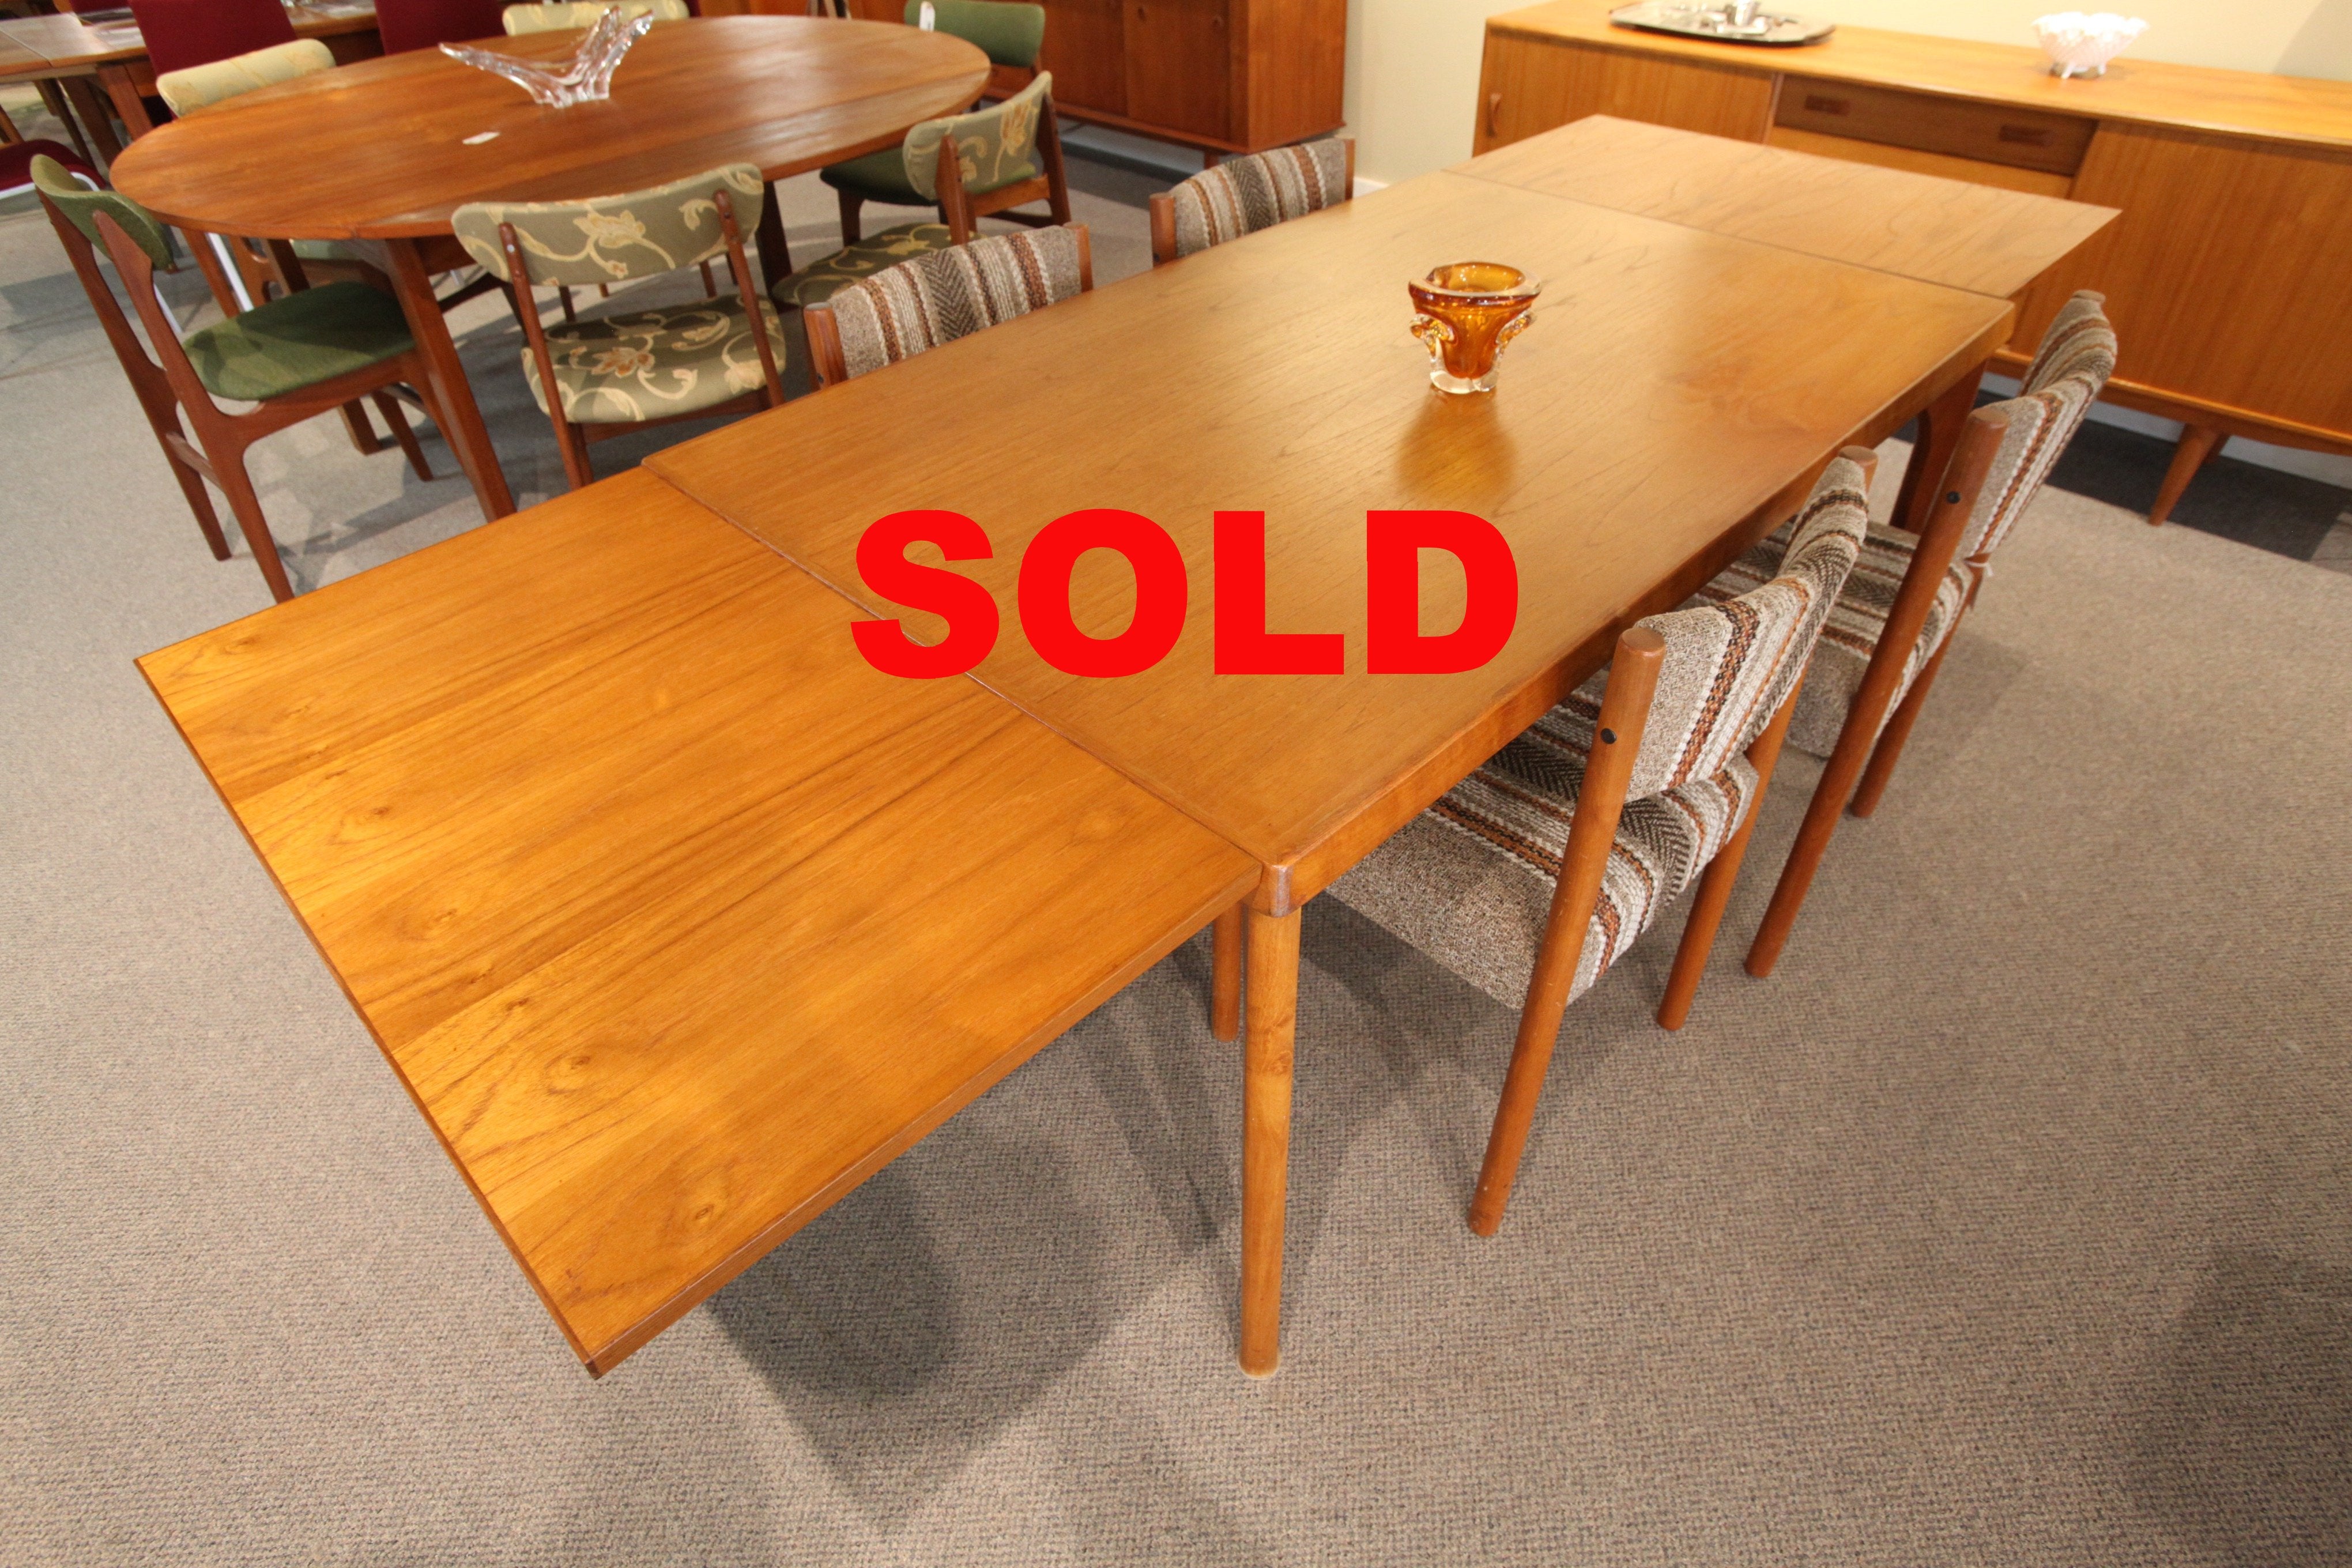 Danish Teak Table with Pullout leafs (55" x 35.5"0 or  (93" x 35.5")